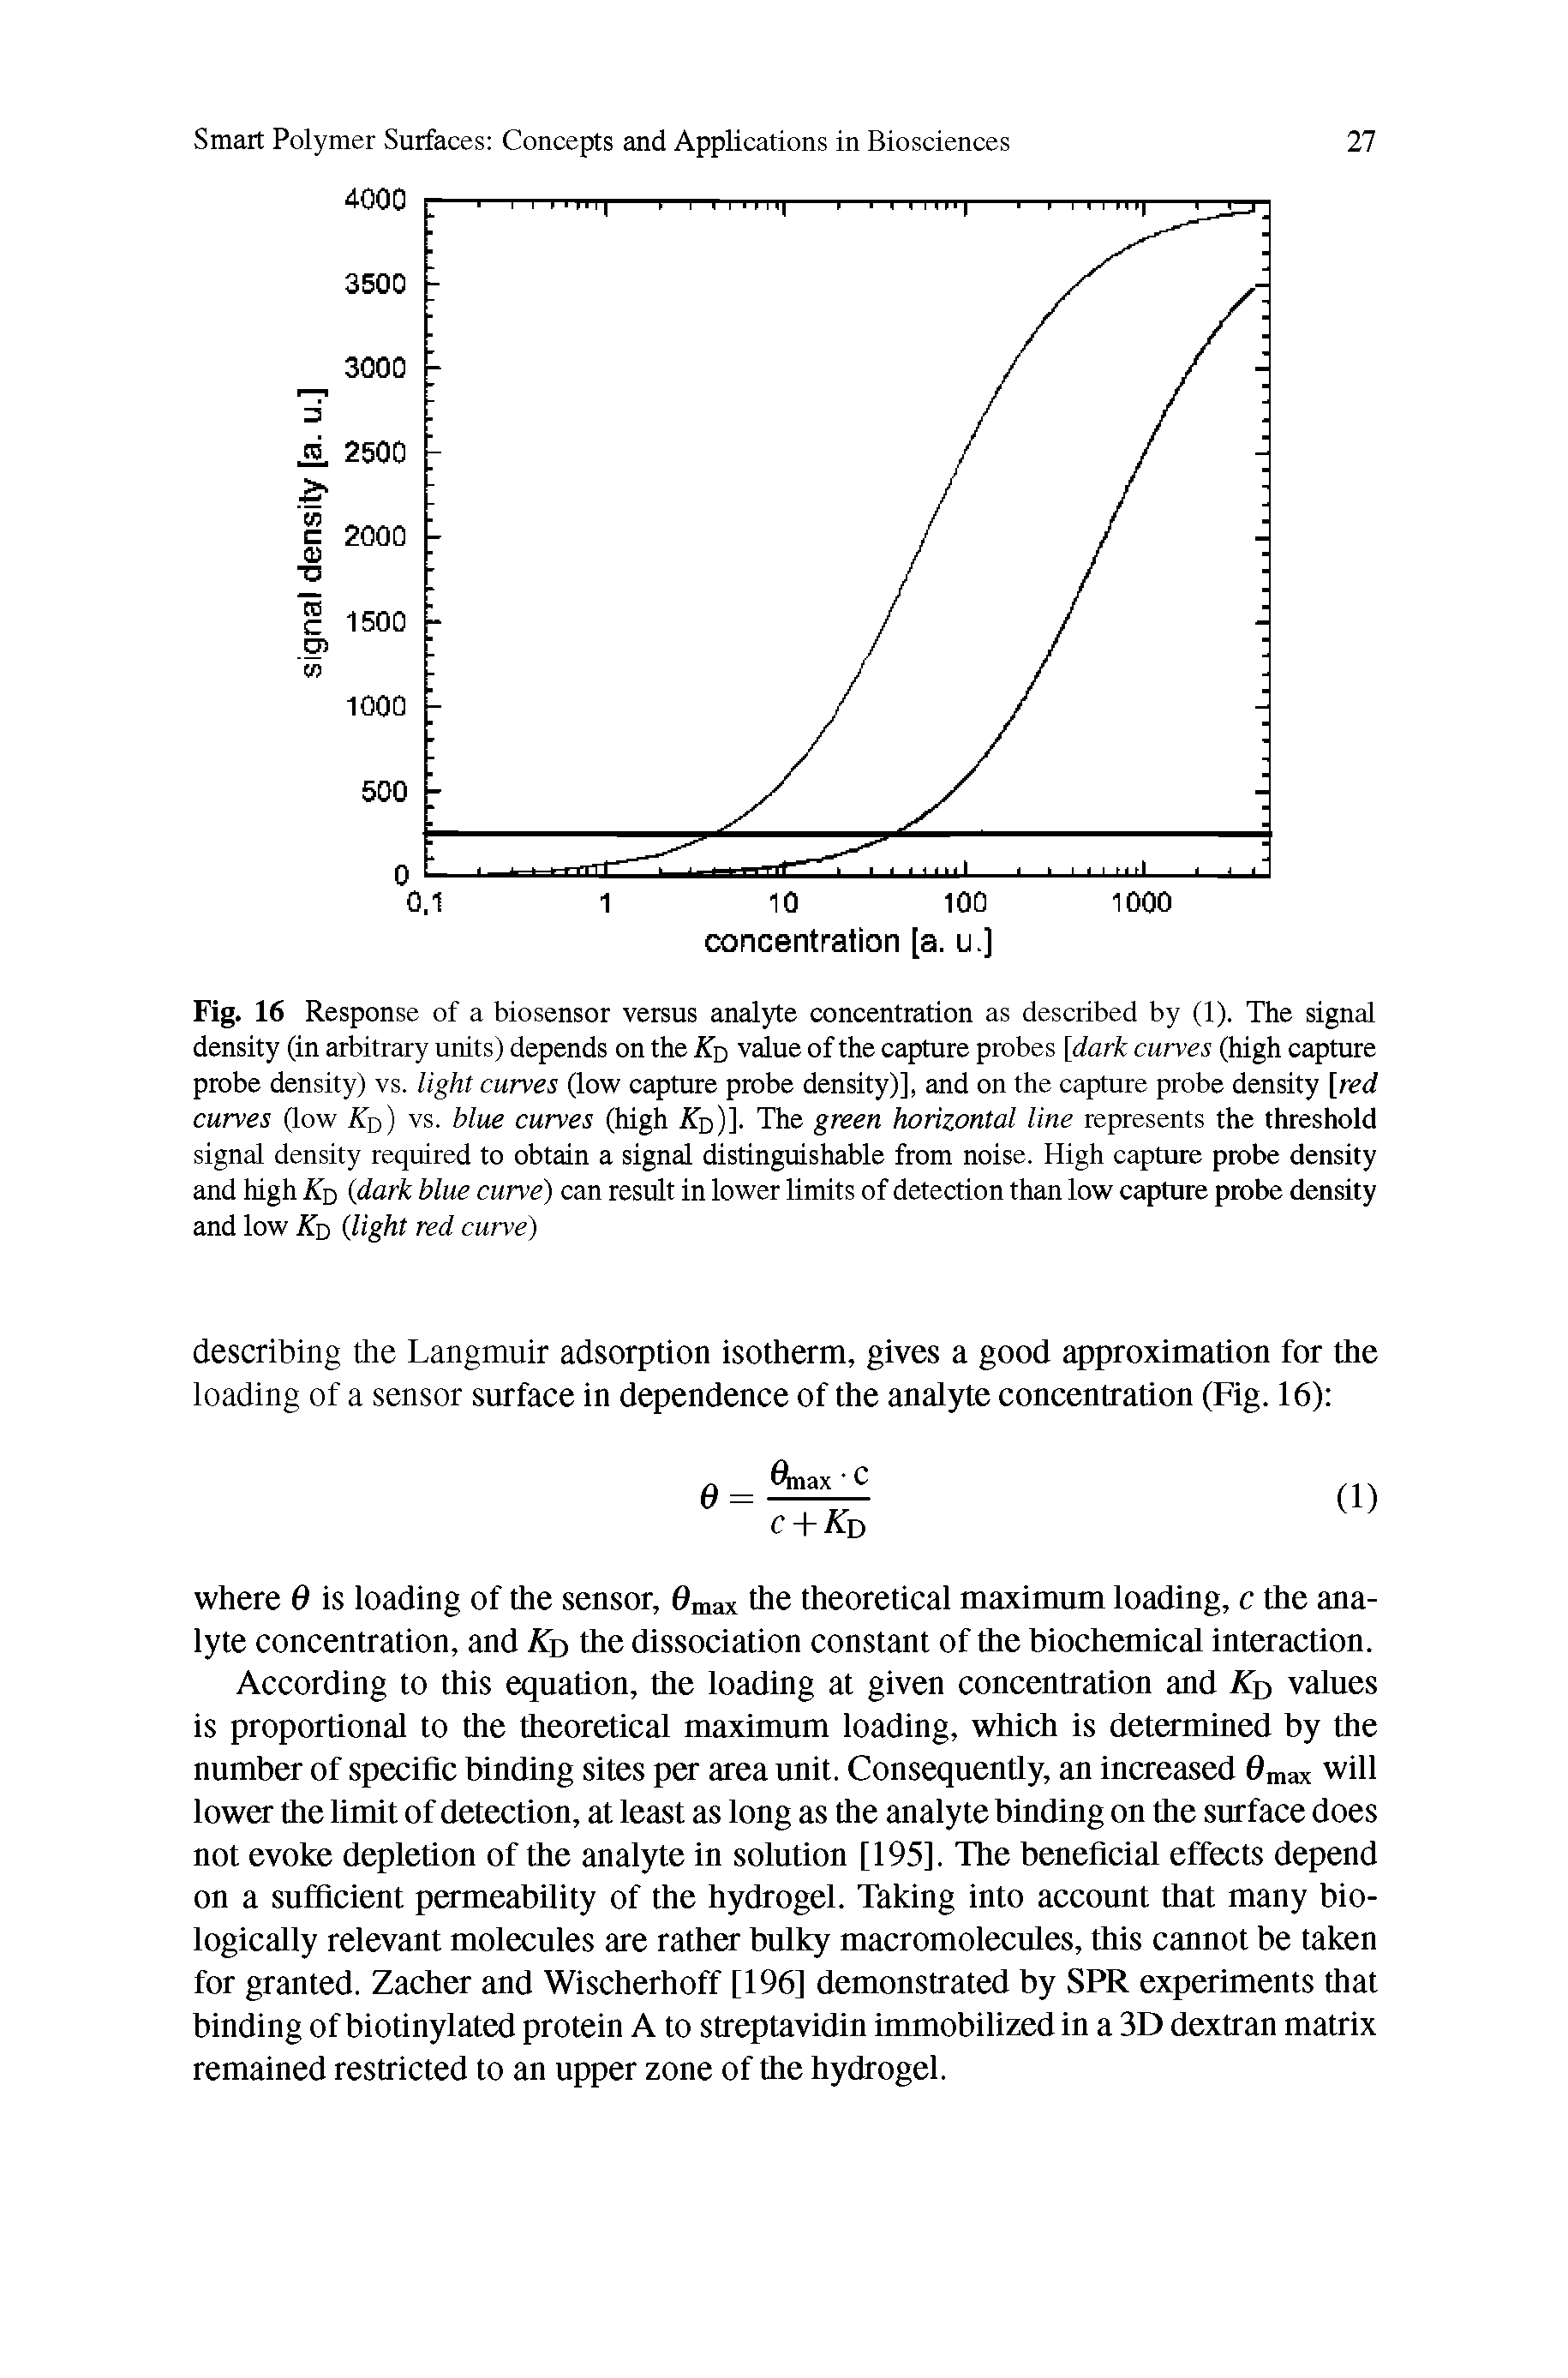 Fig. 16 Response of a biosensor versus analyte concentration as described by (1). The signal density (in arbitrary units) depends on the Kq value of the capture probes [dark curves (high capture probe density) vs. light curves (low capture probe density)], and on the capture probe density [red curves (low Kq) vs. blue curves (high ATd)]. The green horizontal line represents the threshold signal density required to obtain a signal distinguishable from noise. High capture probe density and high Kq (dark blue curve) can result in lower limits of detection than low capture probe density and low Kv (light red curve)...